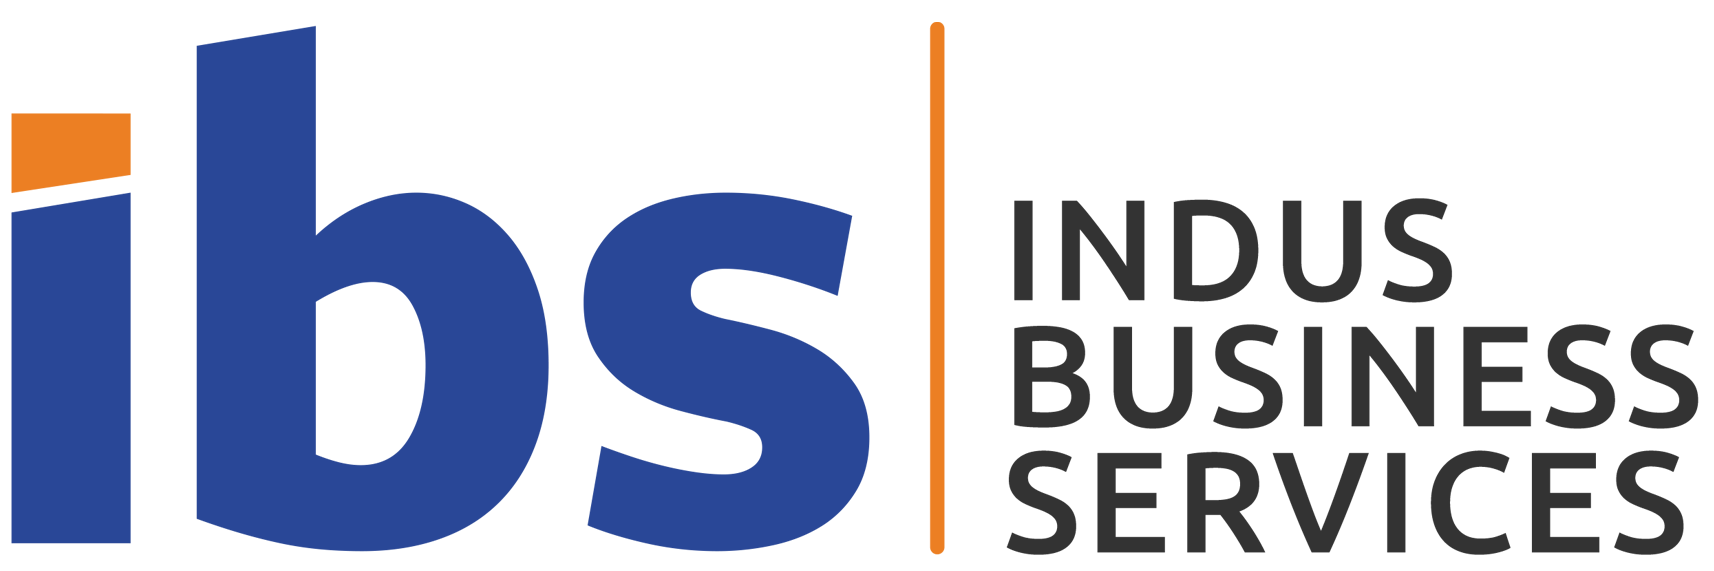 ibs logo 1 Recovered